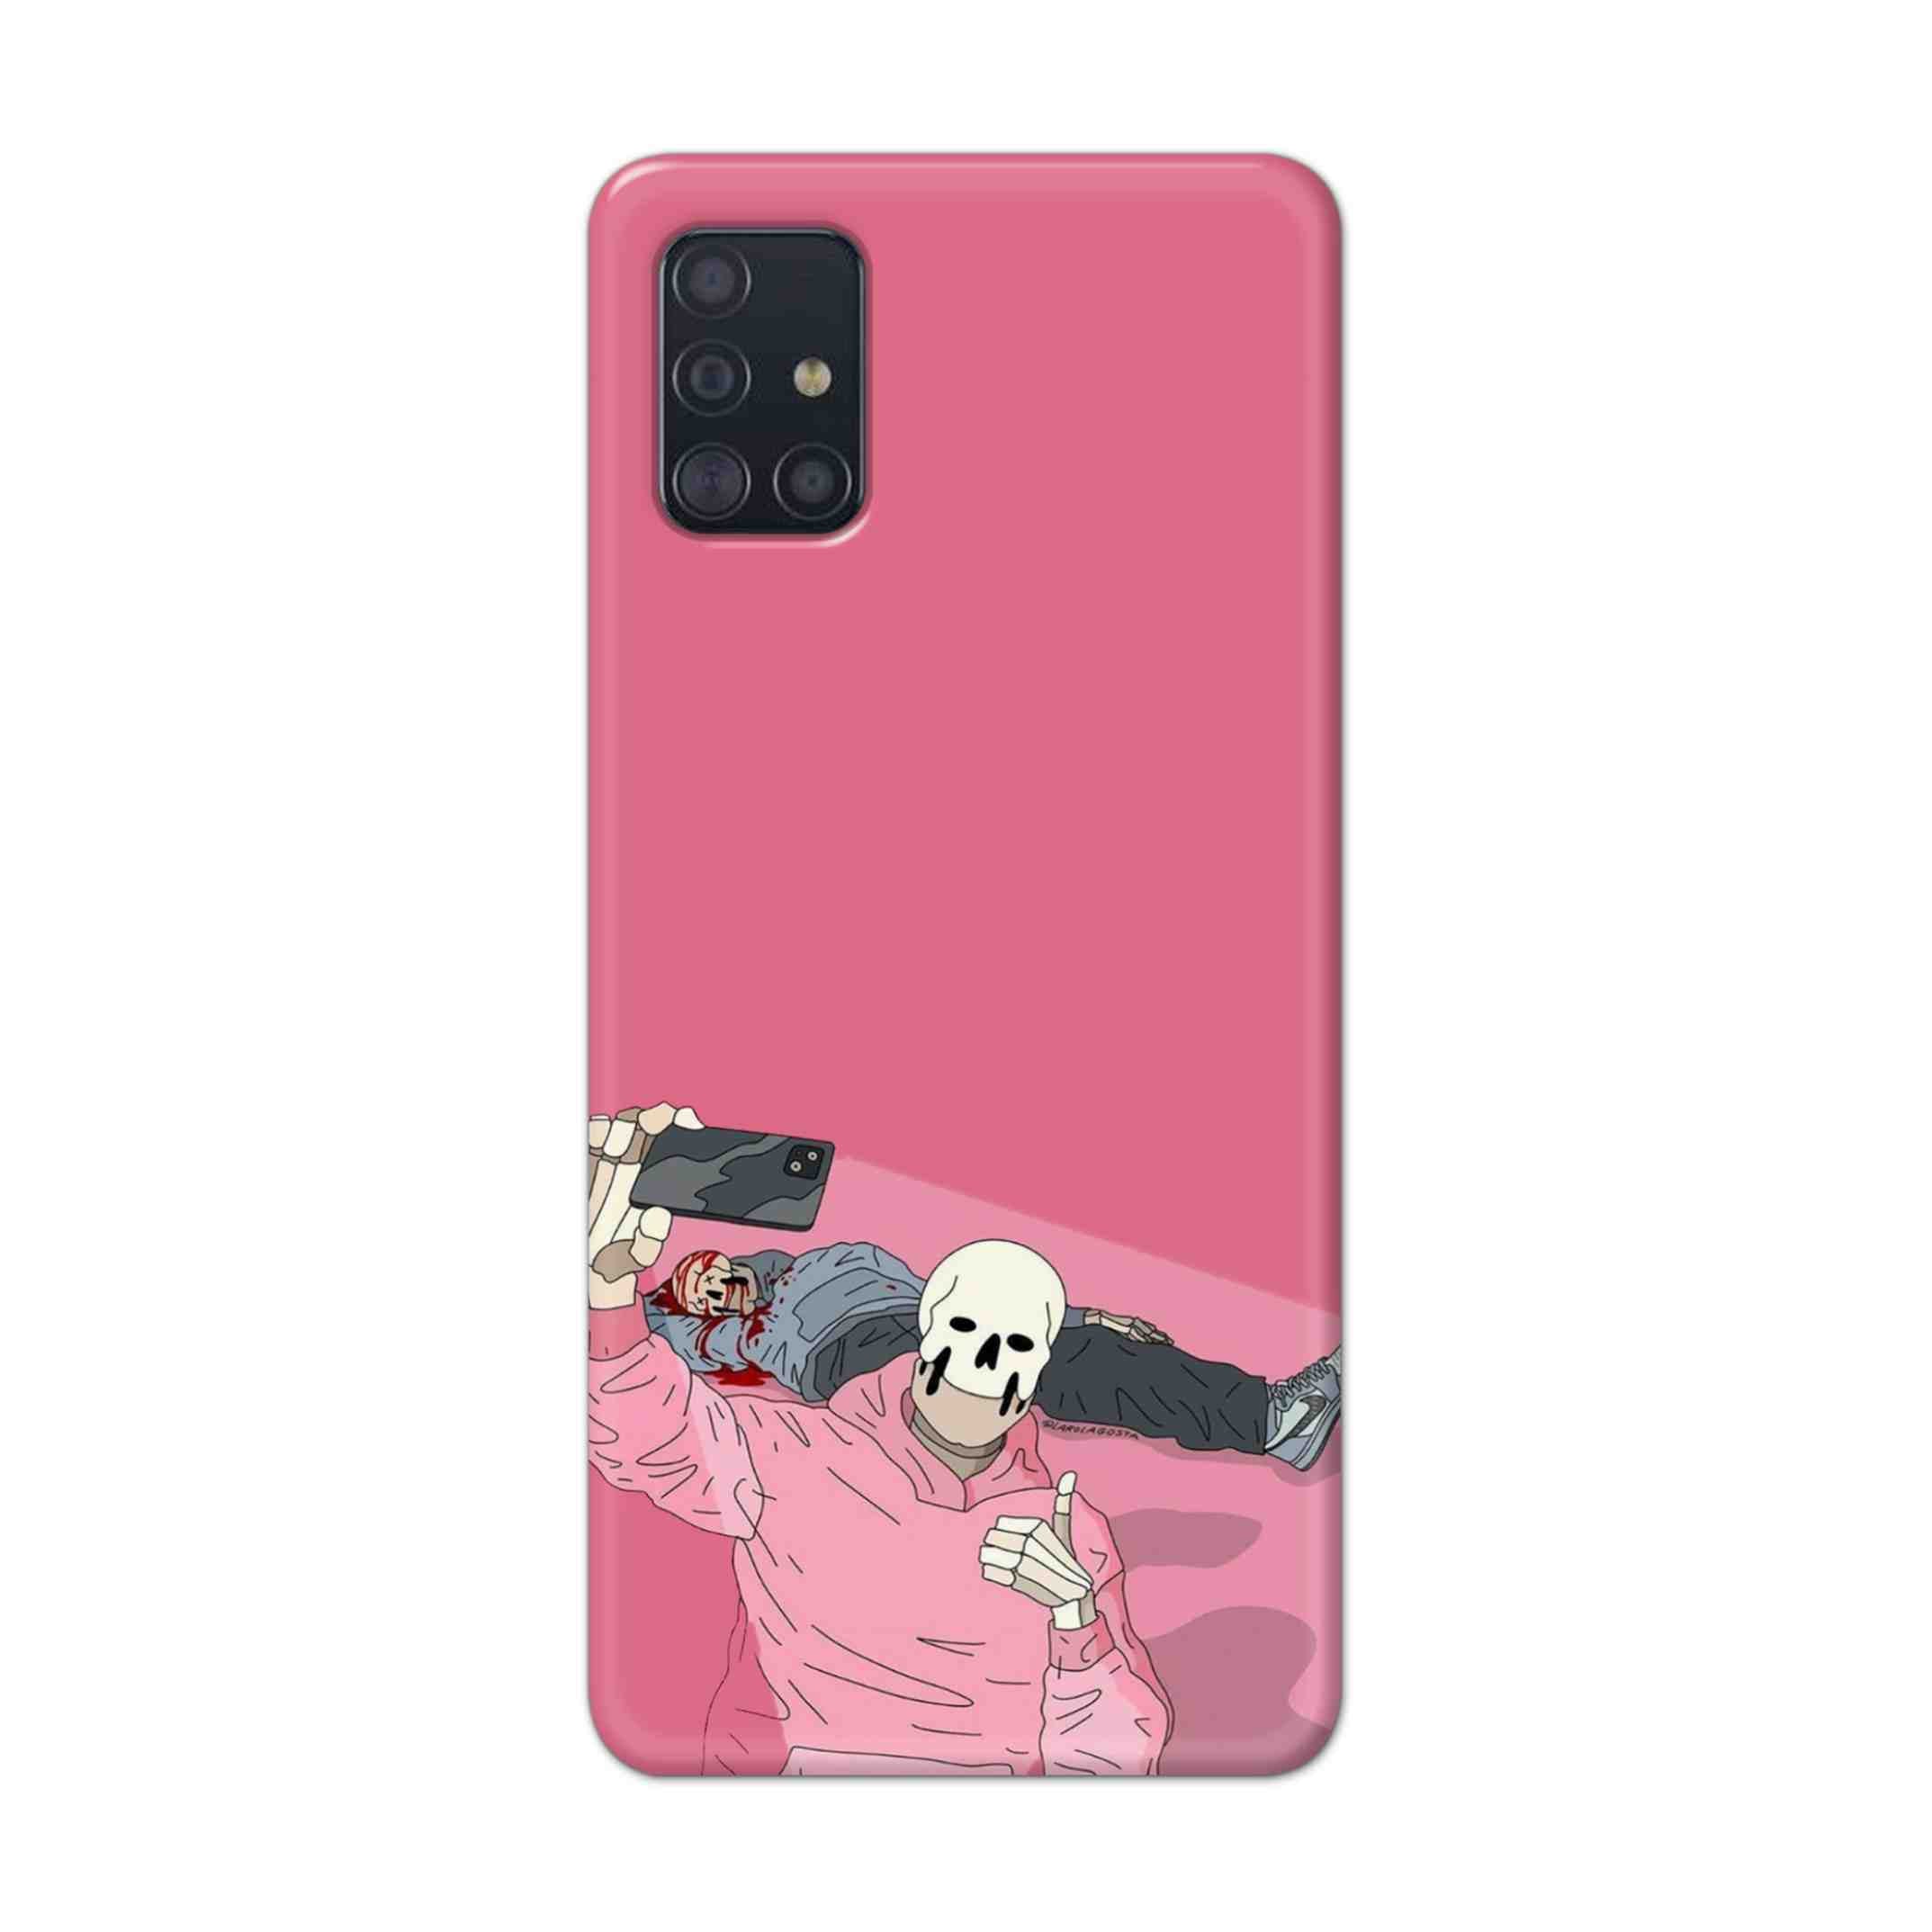 Buy Selfie Hard Back Mobile Phone Case Cover For Samsung Galaxy M31s Online